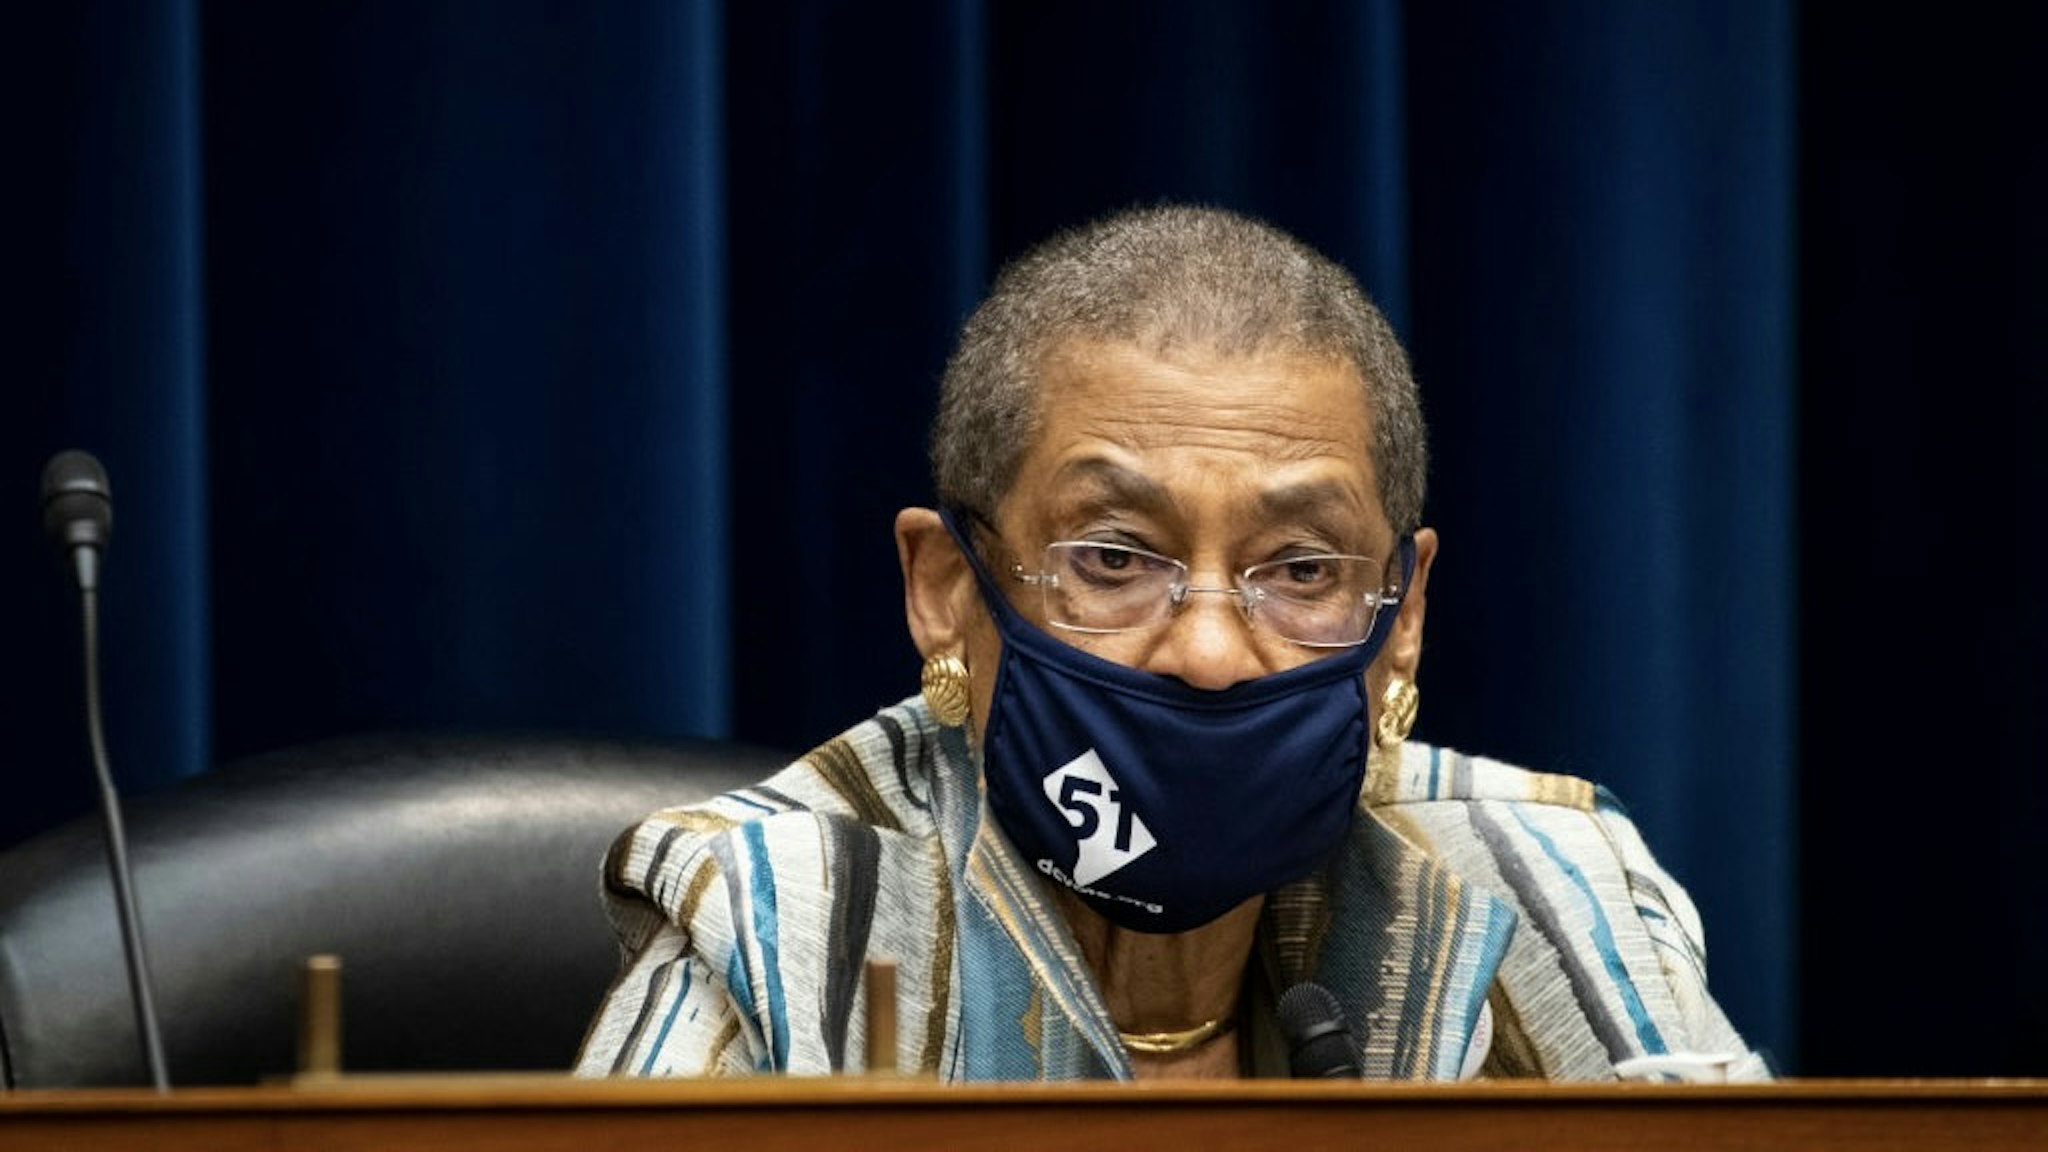 WASHINGTON, DC - MARCH 22: Del. Eleanor Holmes Norton (D-DC) speaks during a House Oversight and Reform Committee hearing March 22, 2021 on Capitol Hill in Washington, DC. The hearing will address H.R.51, the "Washington, D.C. Admission Act", an effort to make Washington D.C. the 51st state. (Photo by Caroline Brehman-Pool/Getty Images)